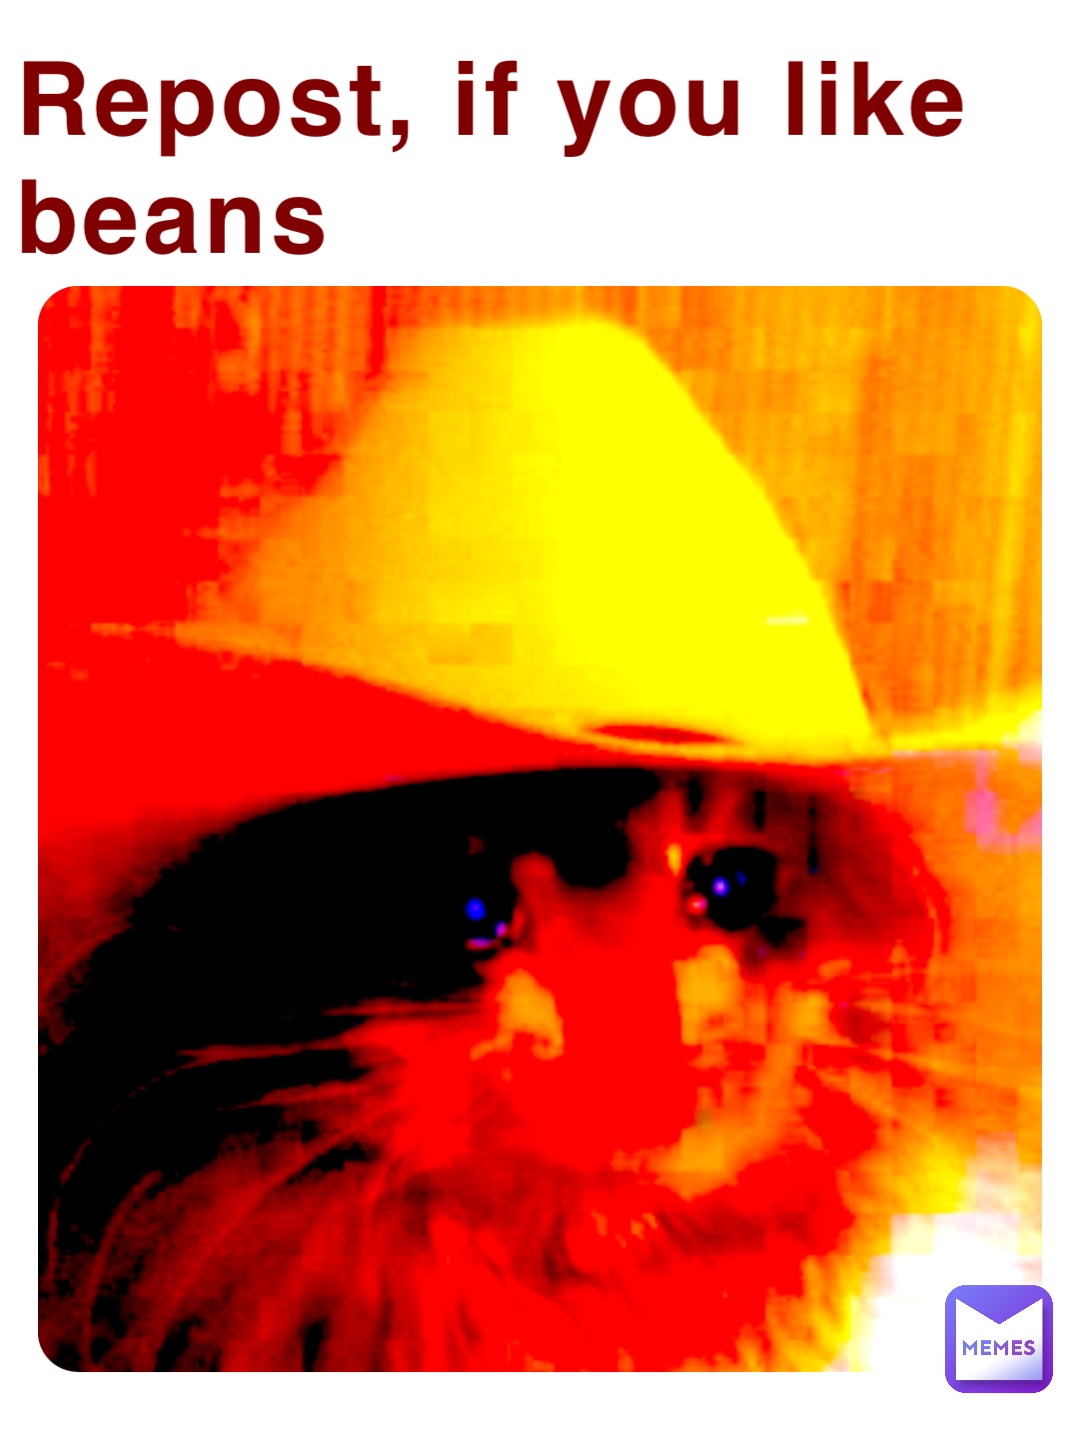 Repost, if you like beans